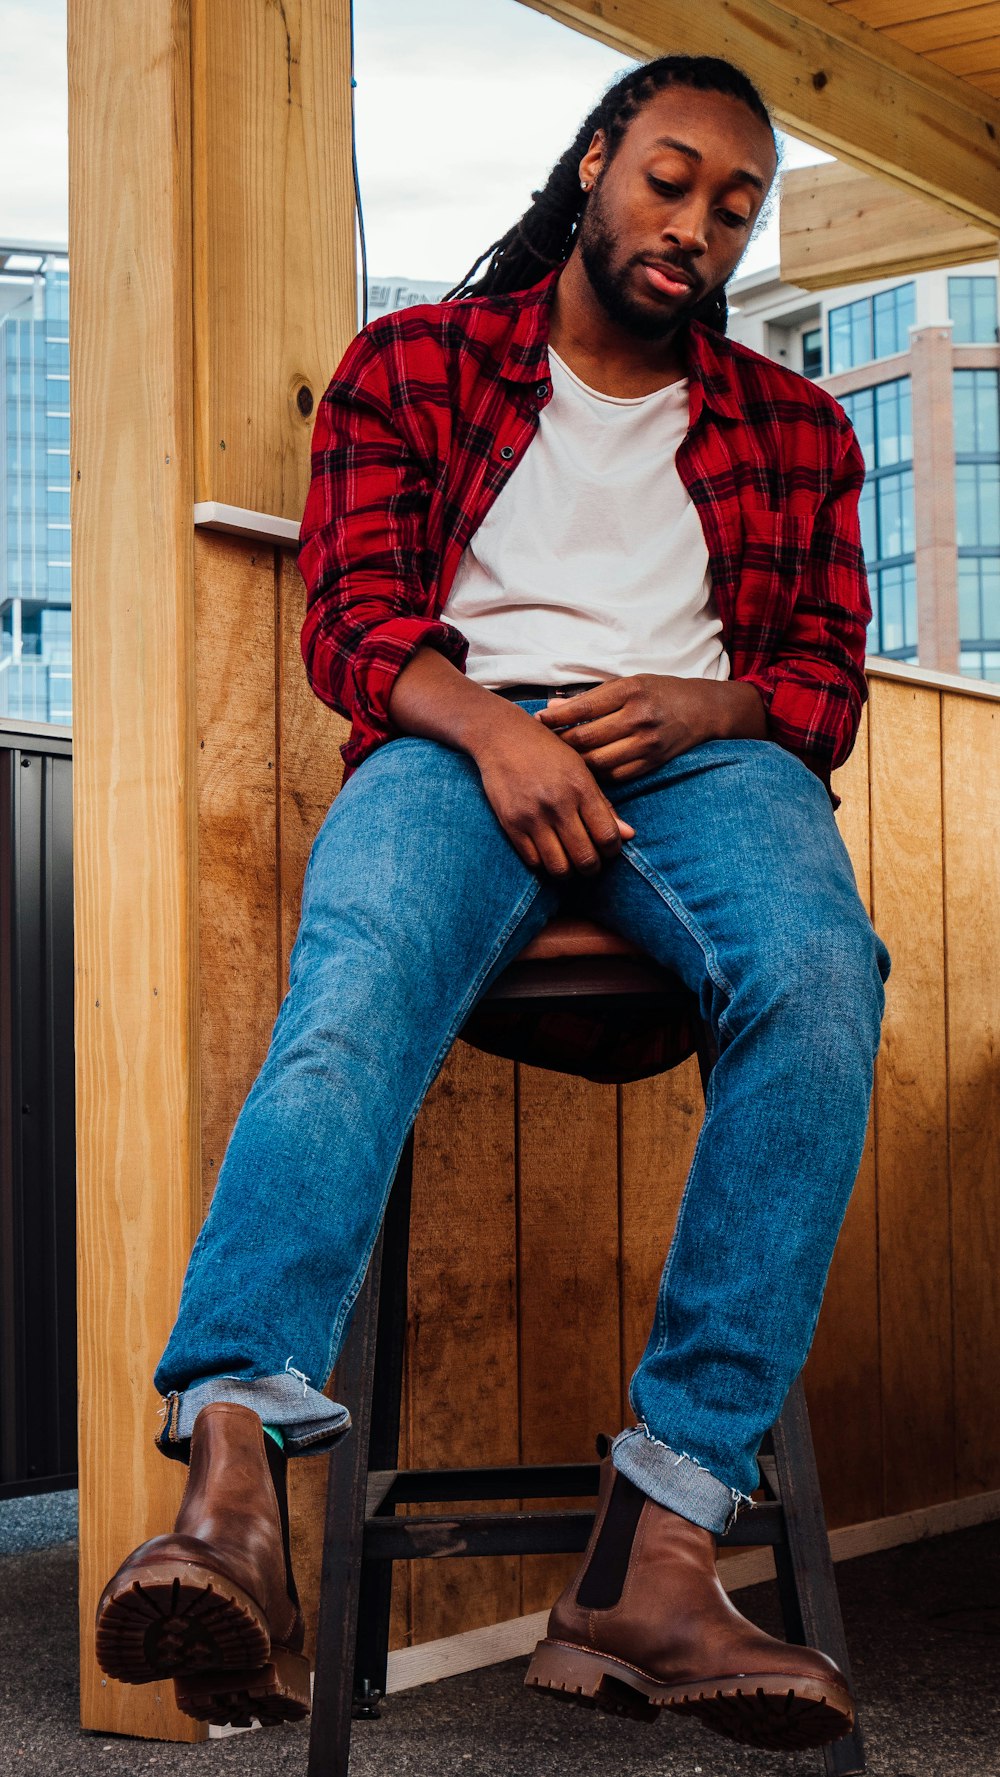 Man in red and white plaid dress shirt and blue denim jeans sitting on  brown wooden photo – Free Model Image on Unsplash